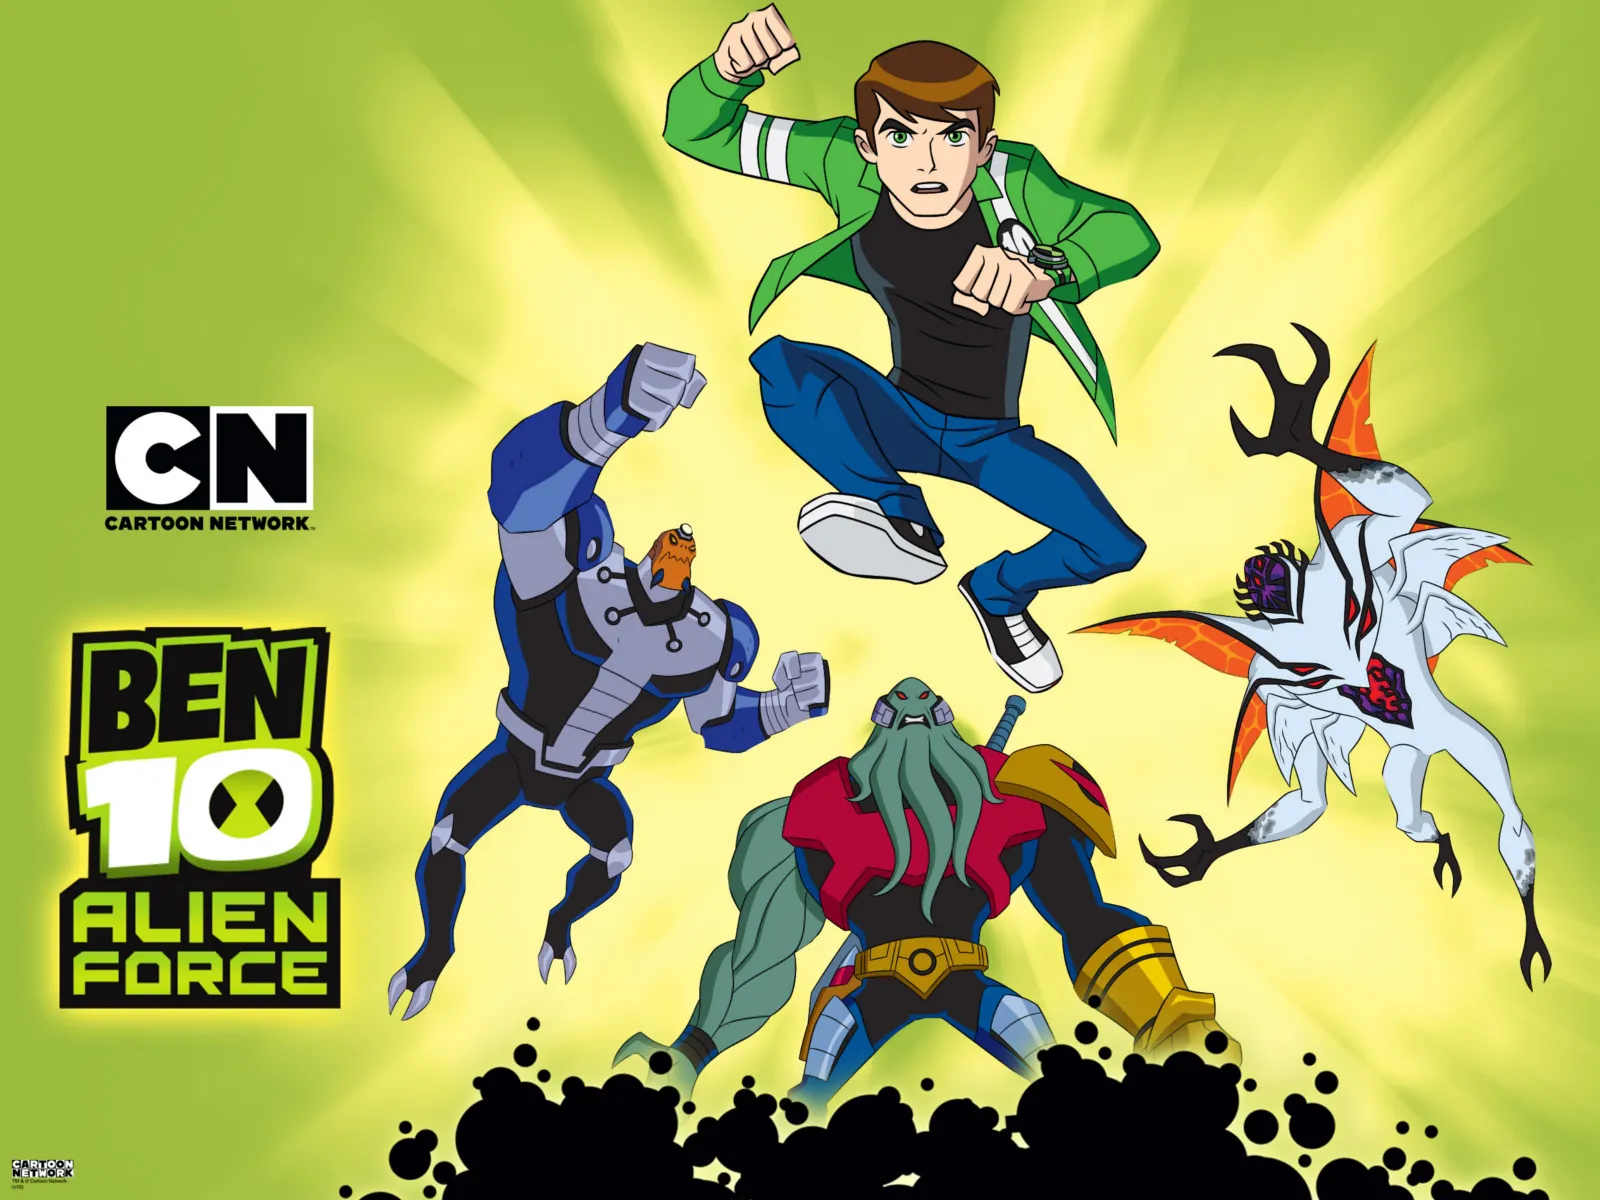 Ben 10 Alien Force Season 1 Hindi Episodes Download in FHD Rare Toons India